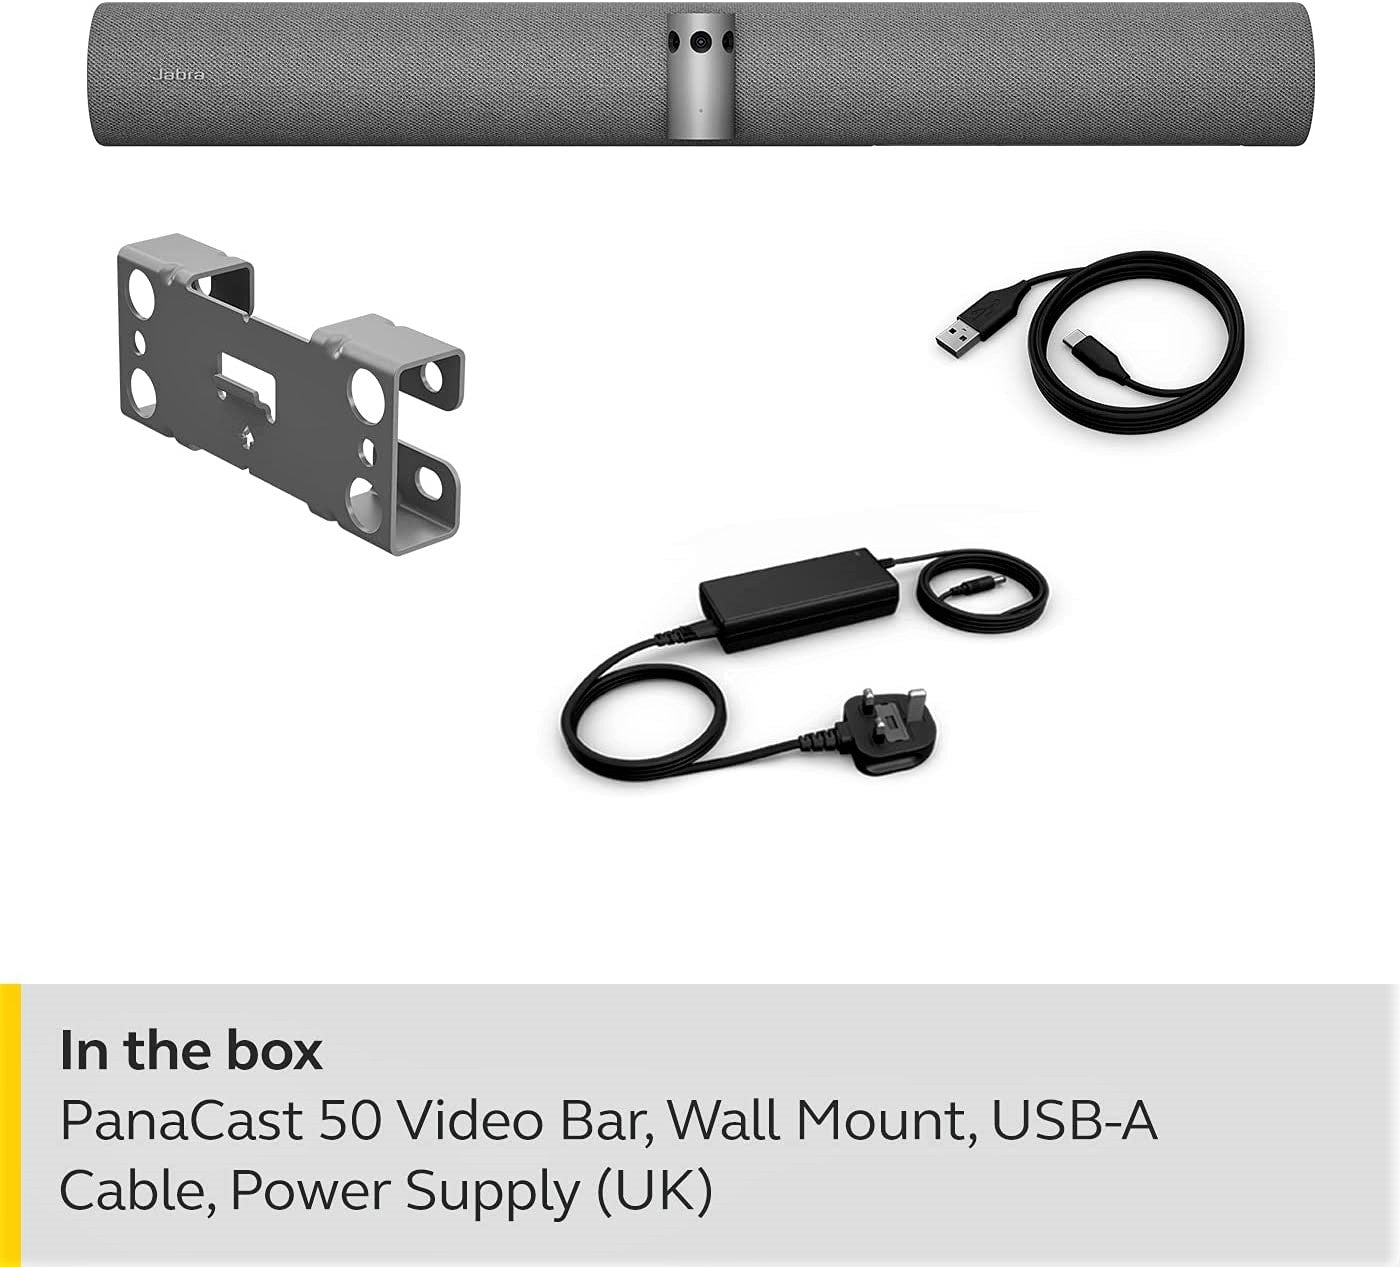 PanaCast 50 Videobar, Wall Mount, USB-A Cable, and Power Supply